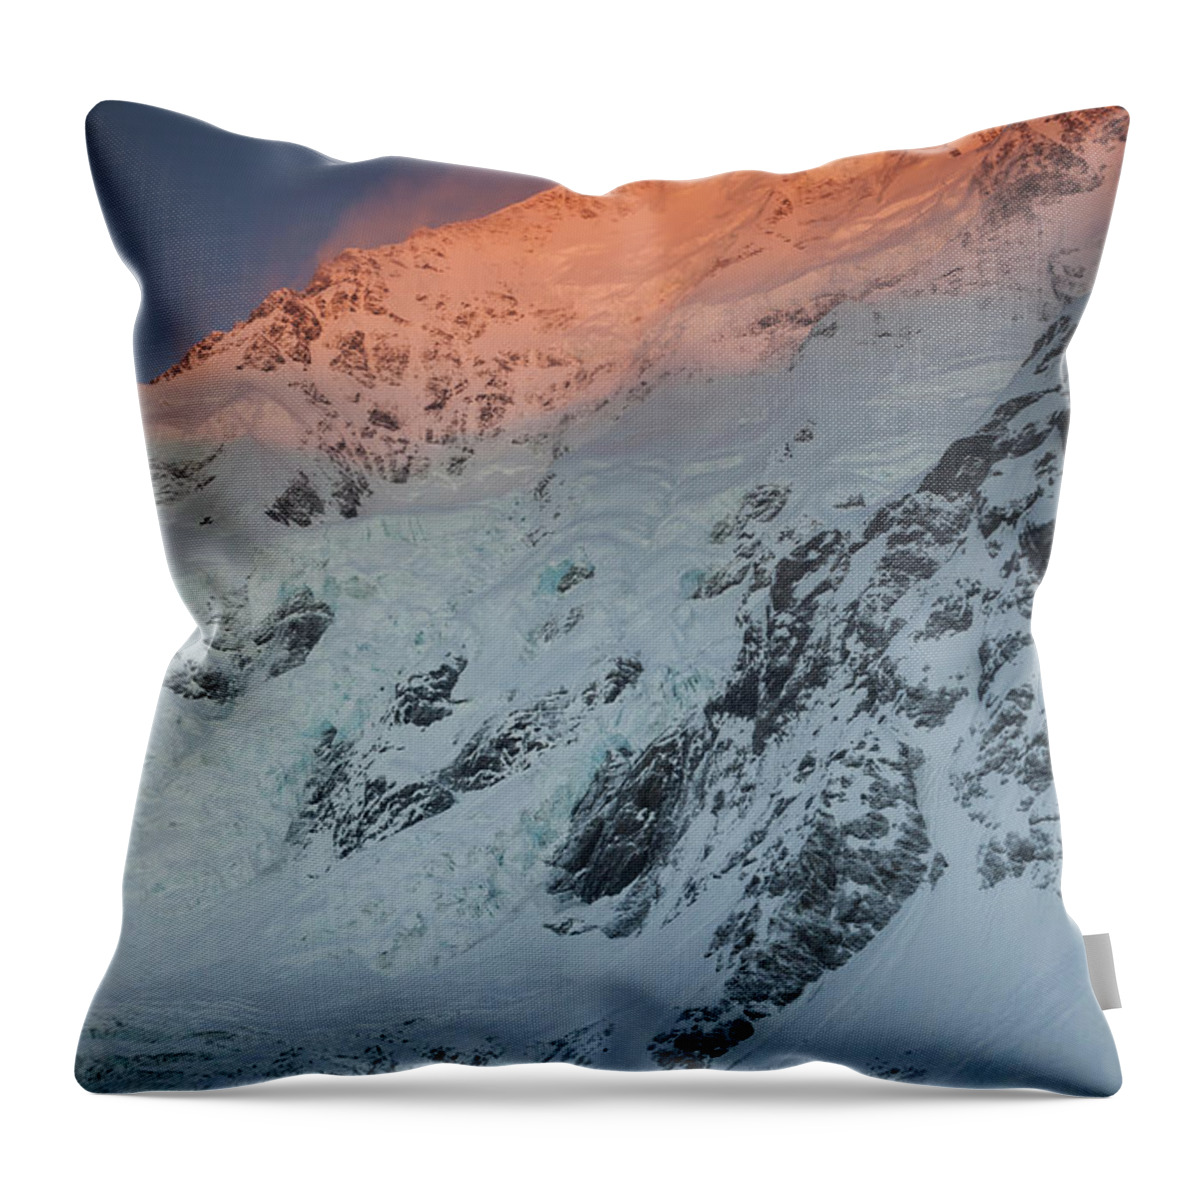 00498853 Throw Pillow featuring the photograph Caroline Face Of Mount Cook At Dawn by Colin Monteath